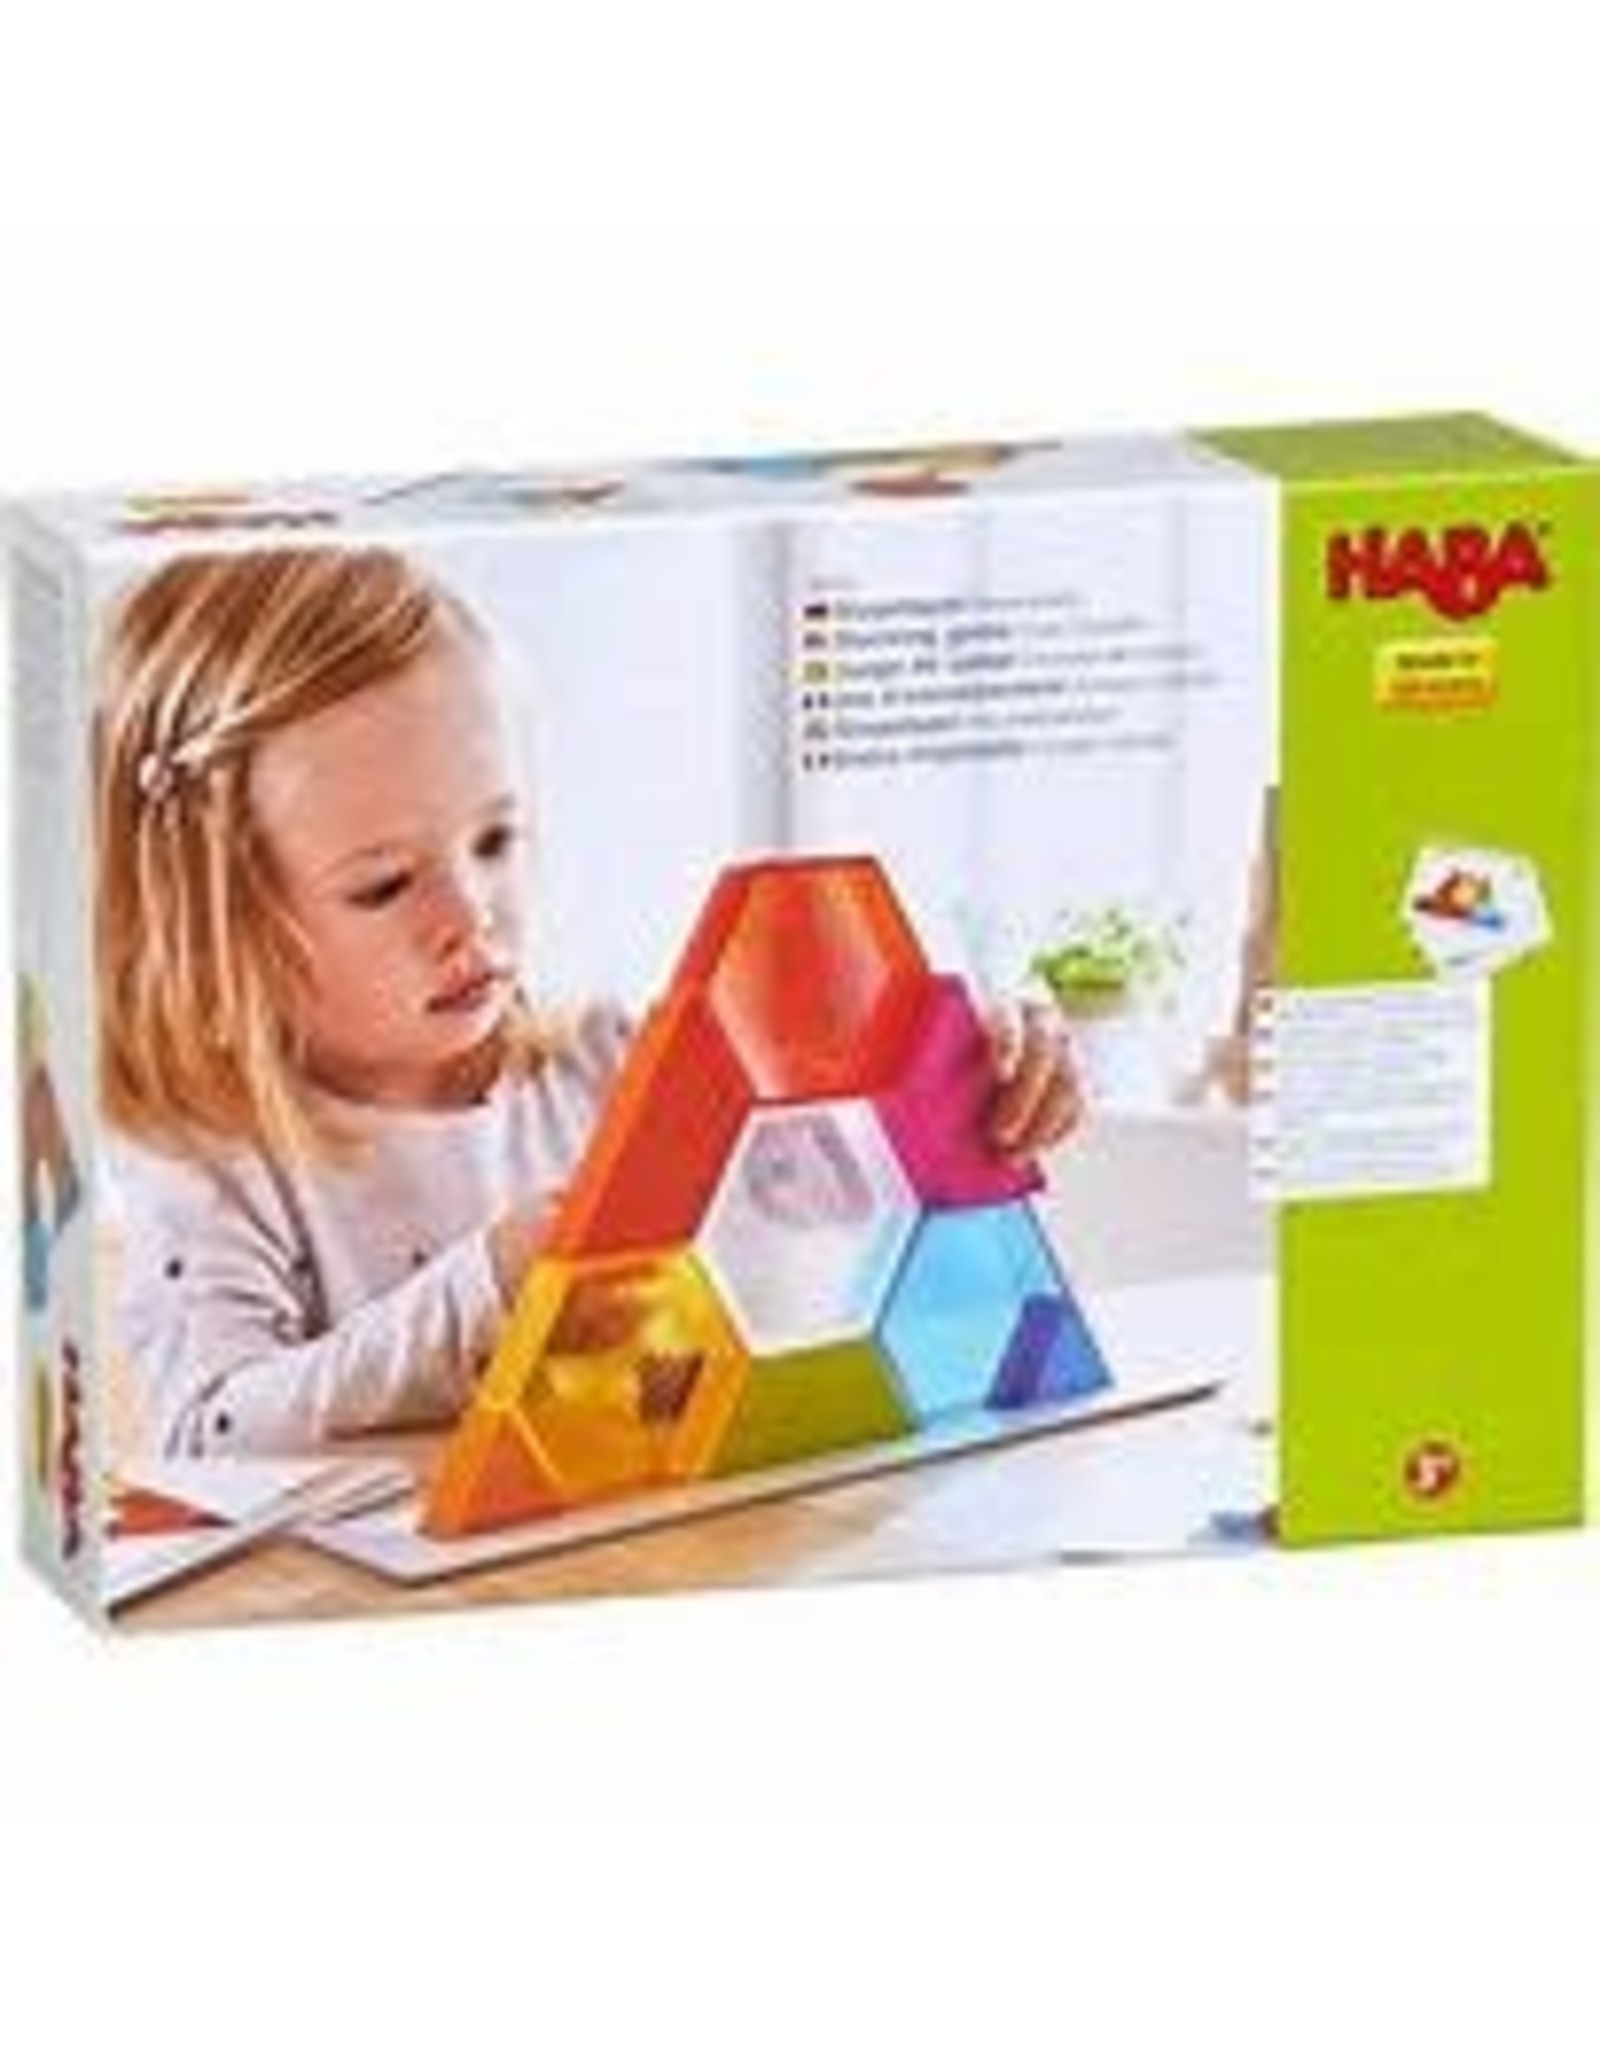 Haba x Color Crystals Stacking Game